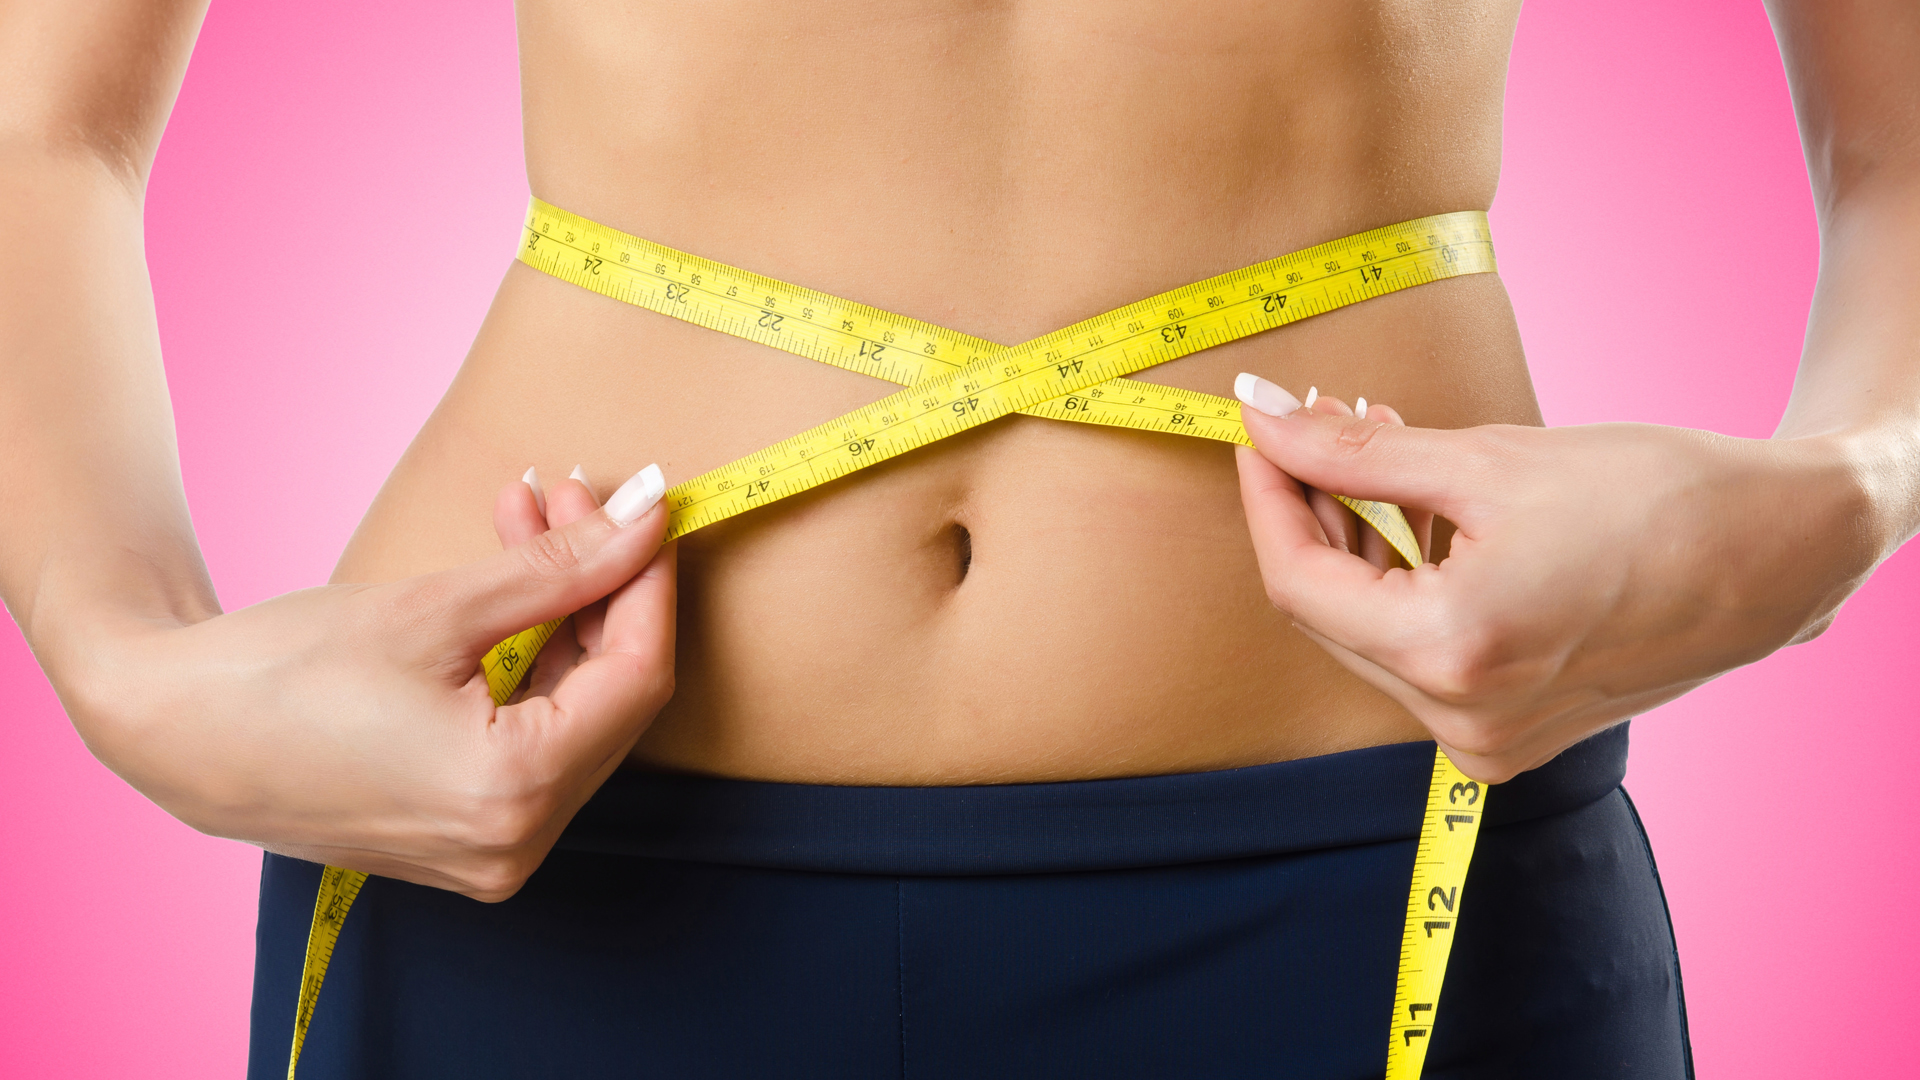 An easy way to lose weight without surgery